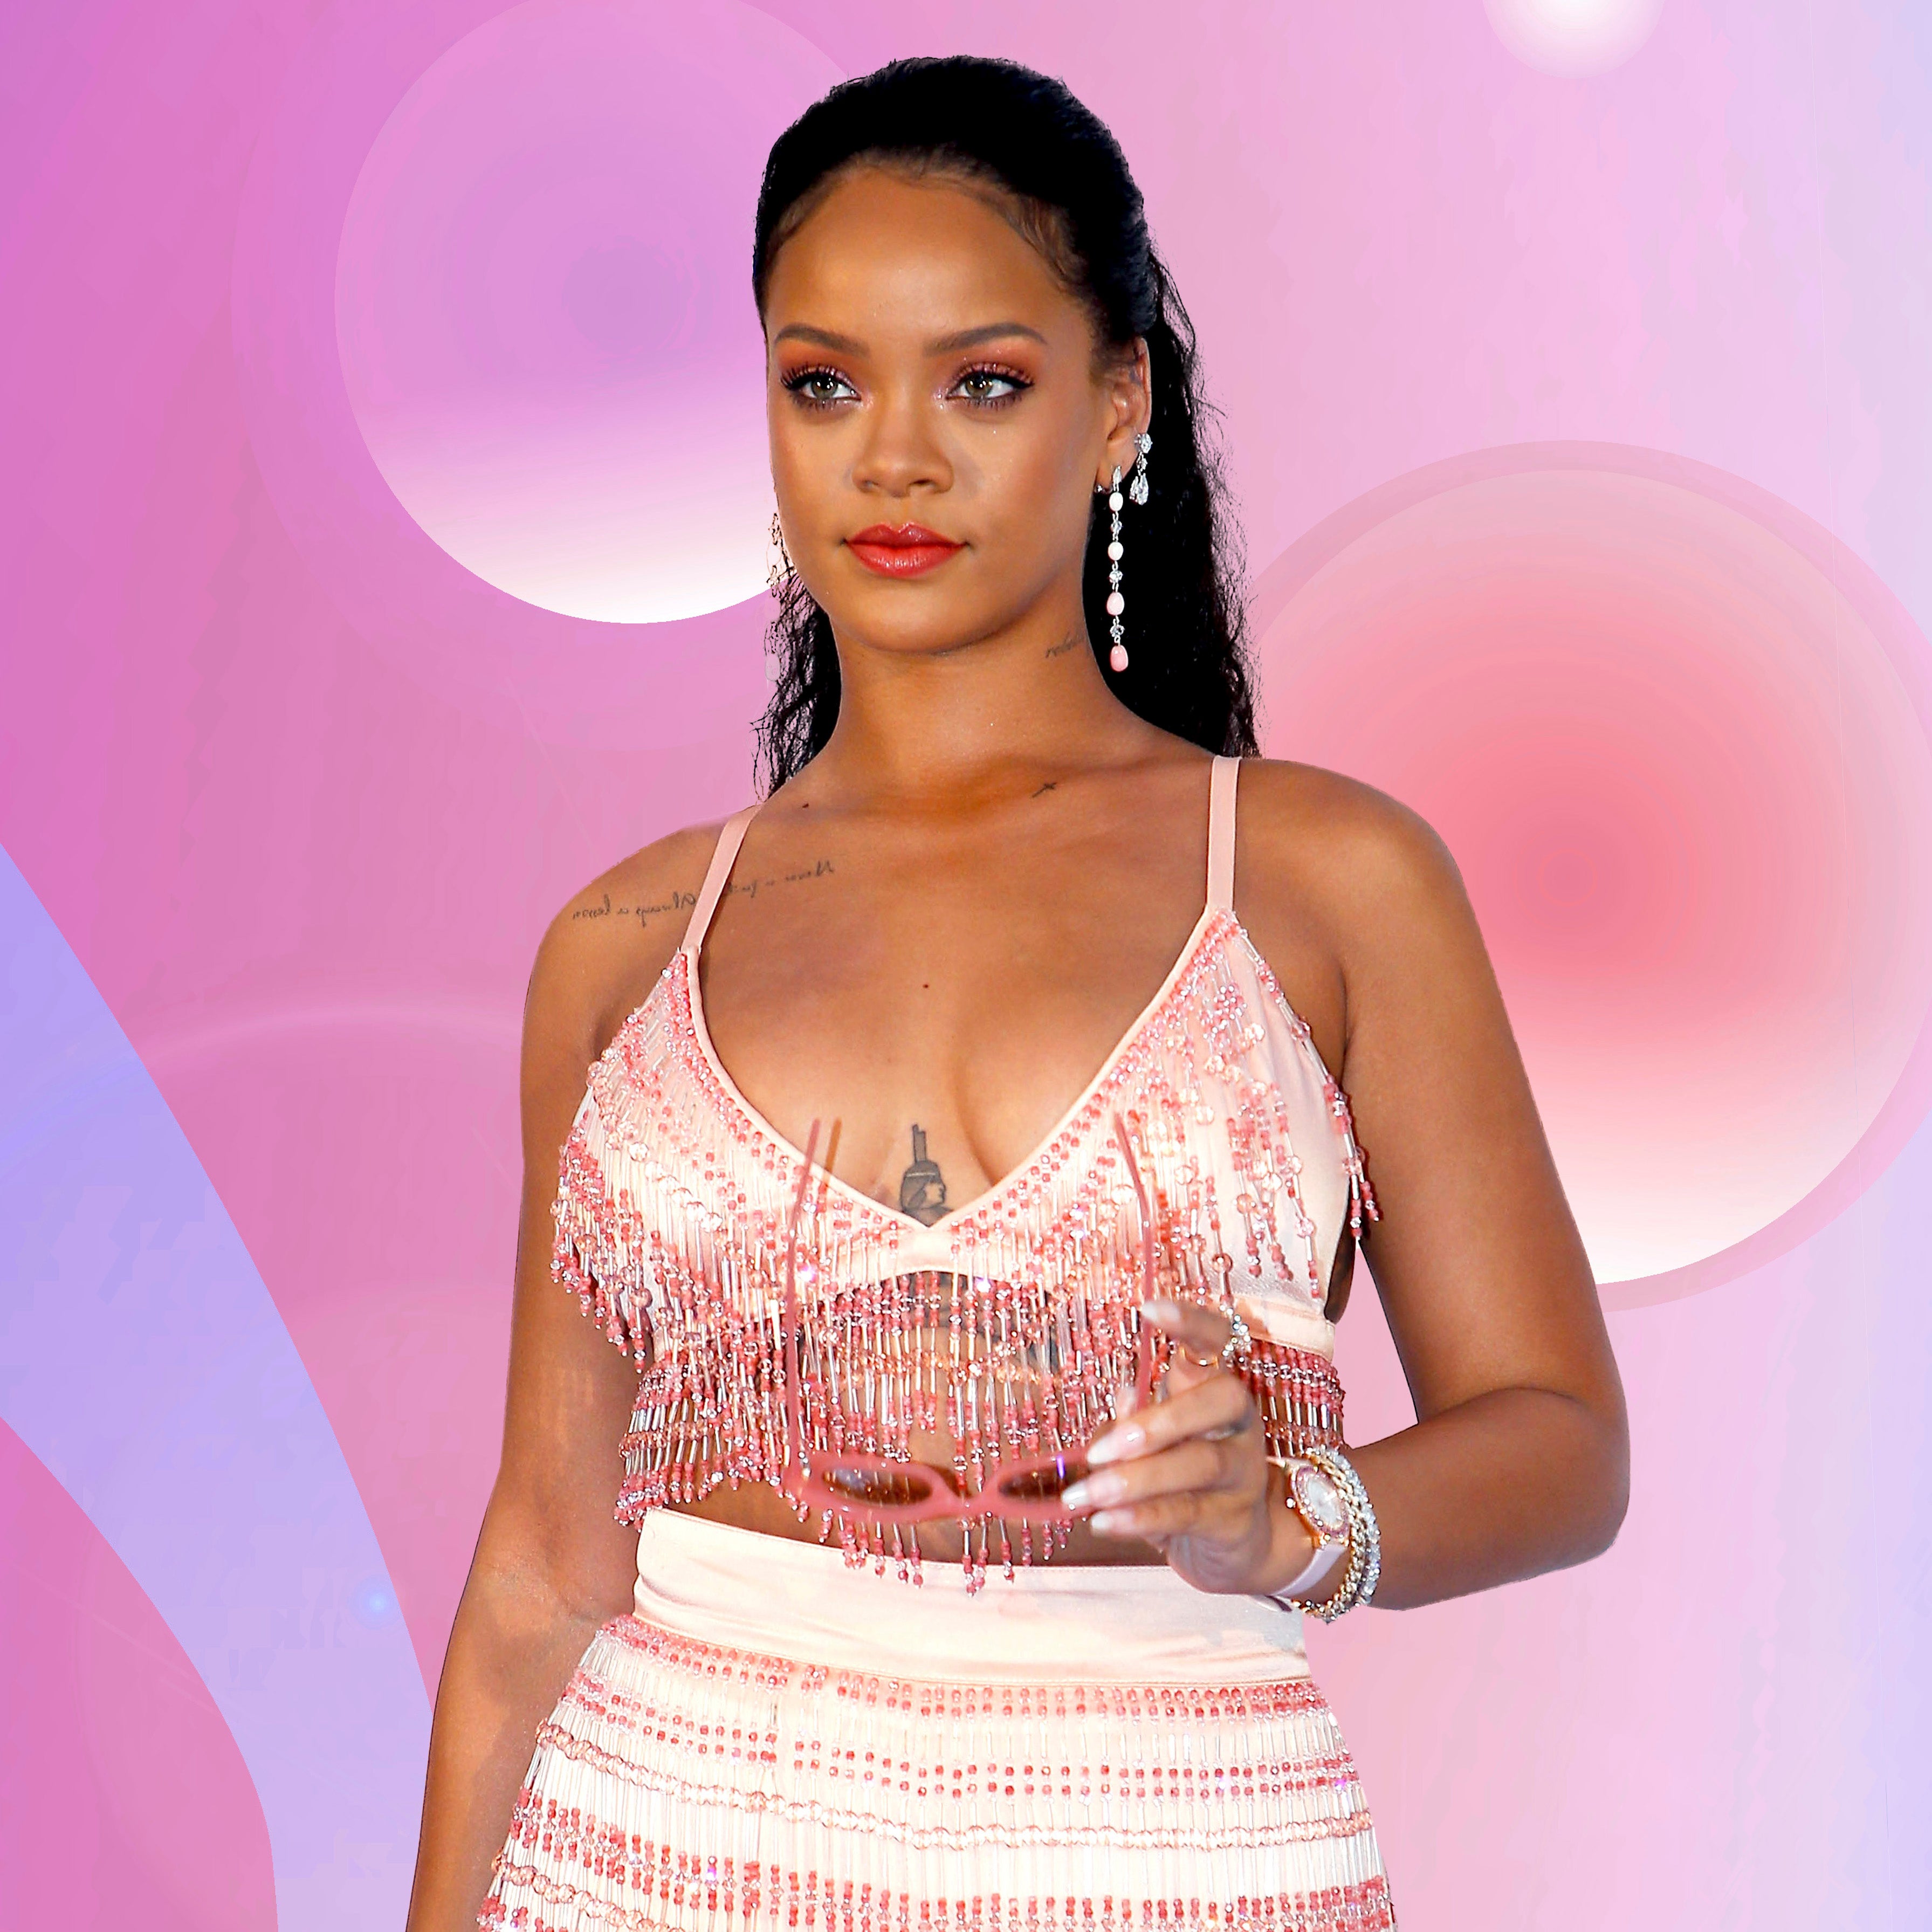 Rihanna Just Previewed Fenty Beauty on the Red Carpet
